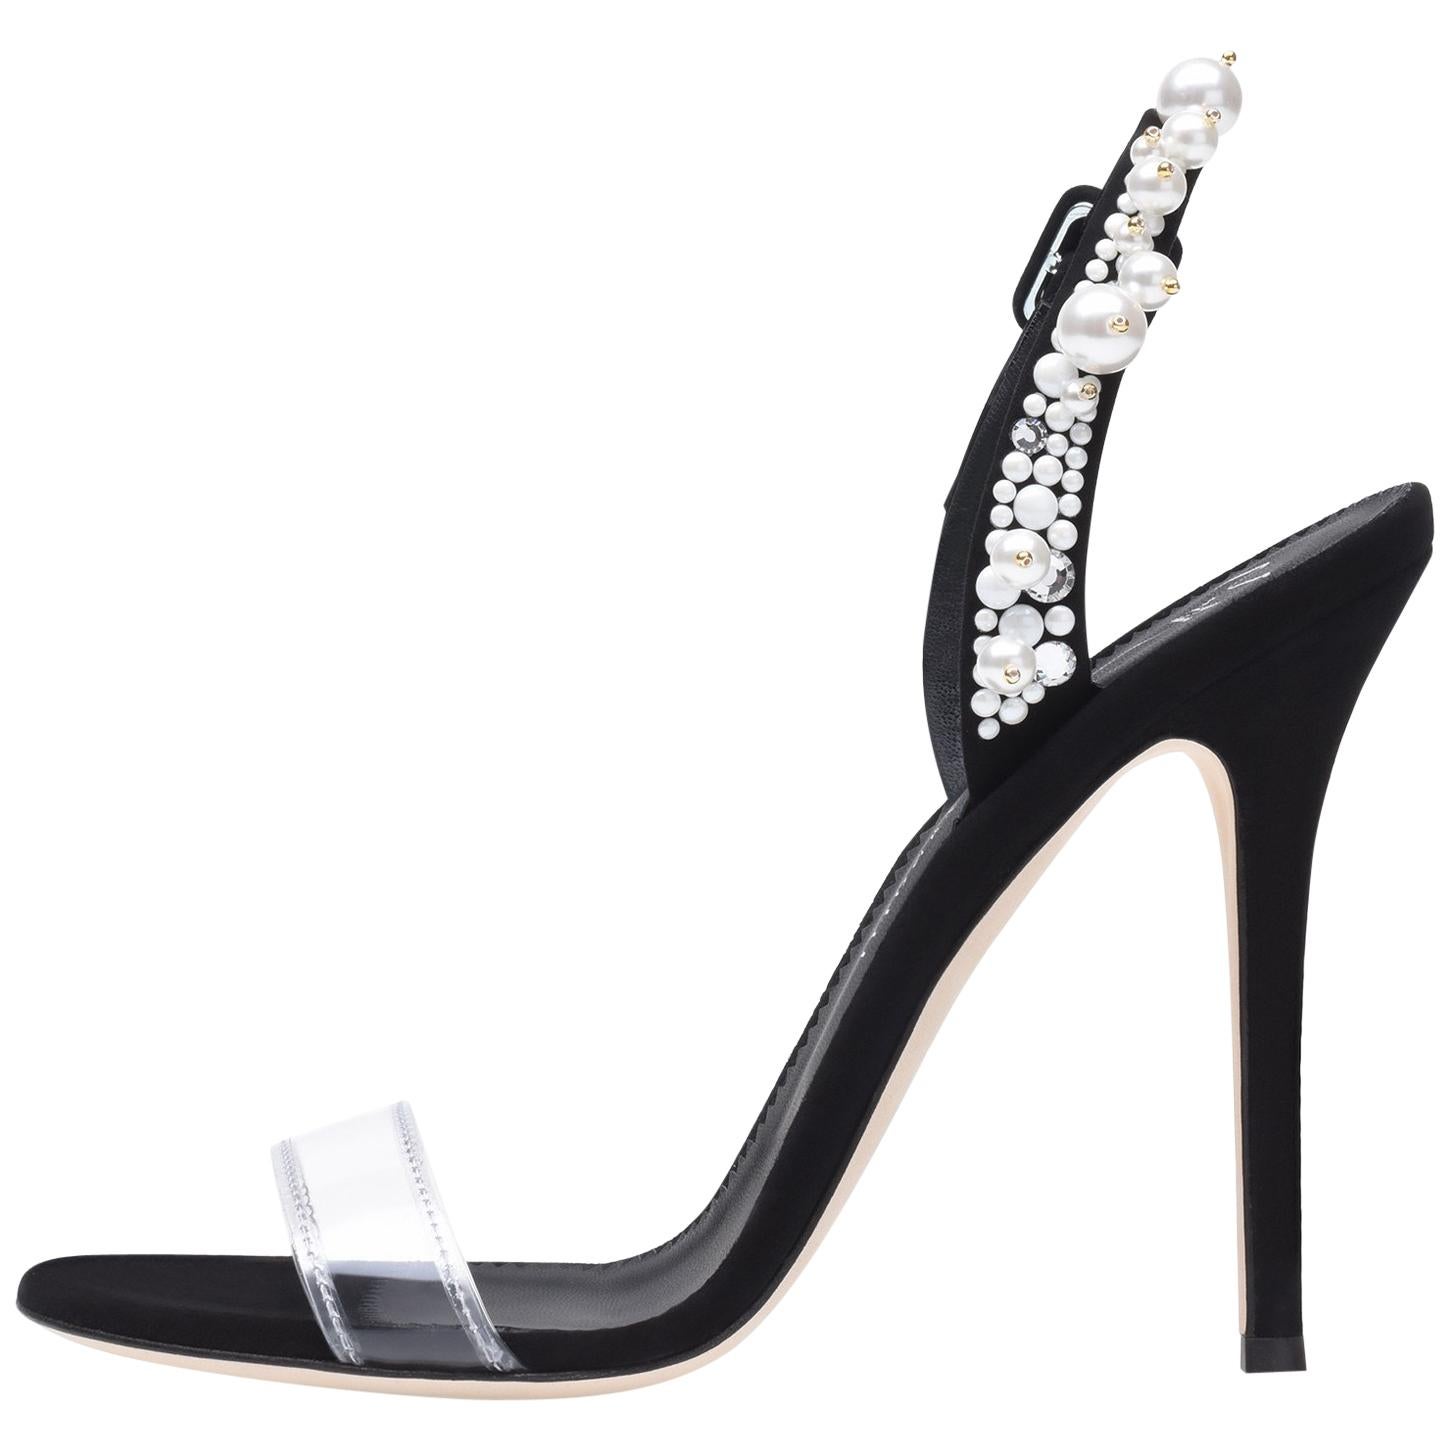 Giuseppe Zanotti NEW Black Suede PVC Pearl Crystal Evening Sandals Heels in Box